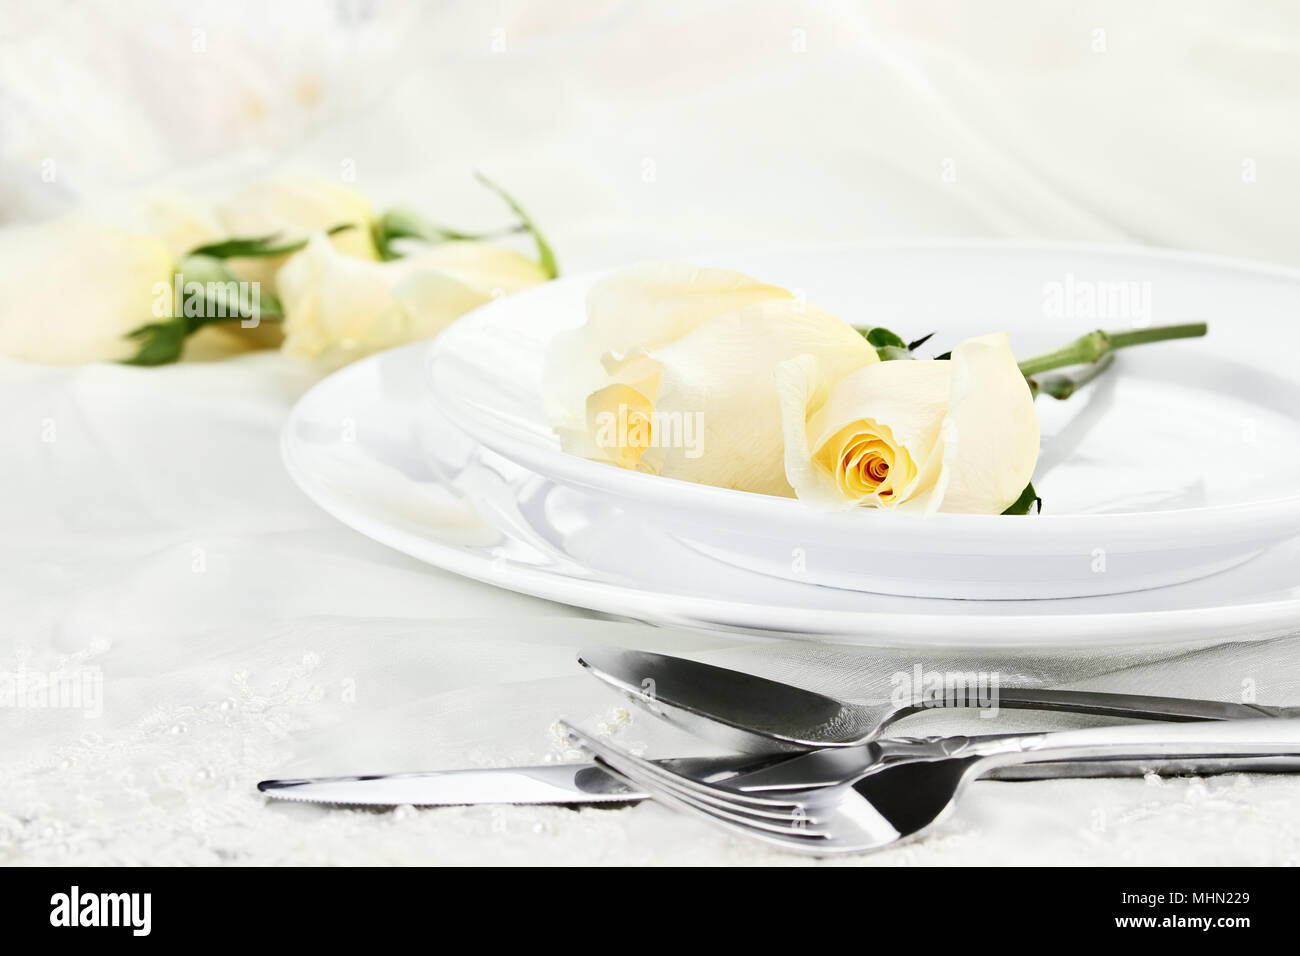 Romantic table setting with long stem yellow rose. Shallow depth of field. Stock Photo